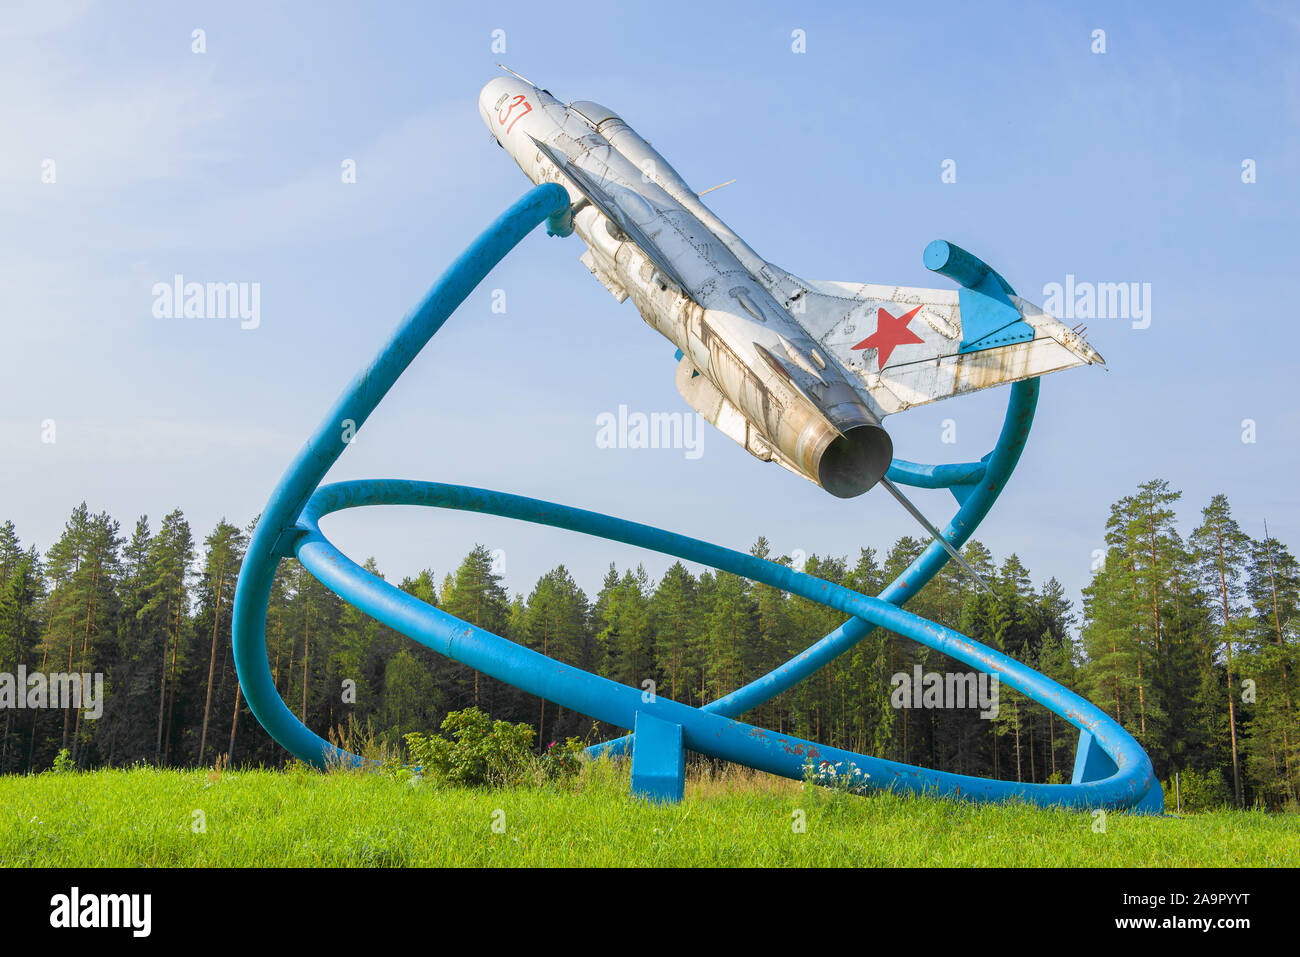 TIKHVIN, RUSSIA - SEPTEMBER 11, 2019: MiG-21 airplane - a monument in honor of the Great Patriotic War pilots on the A-114 highway Stock Photo